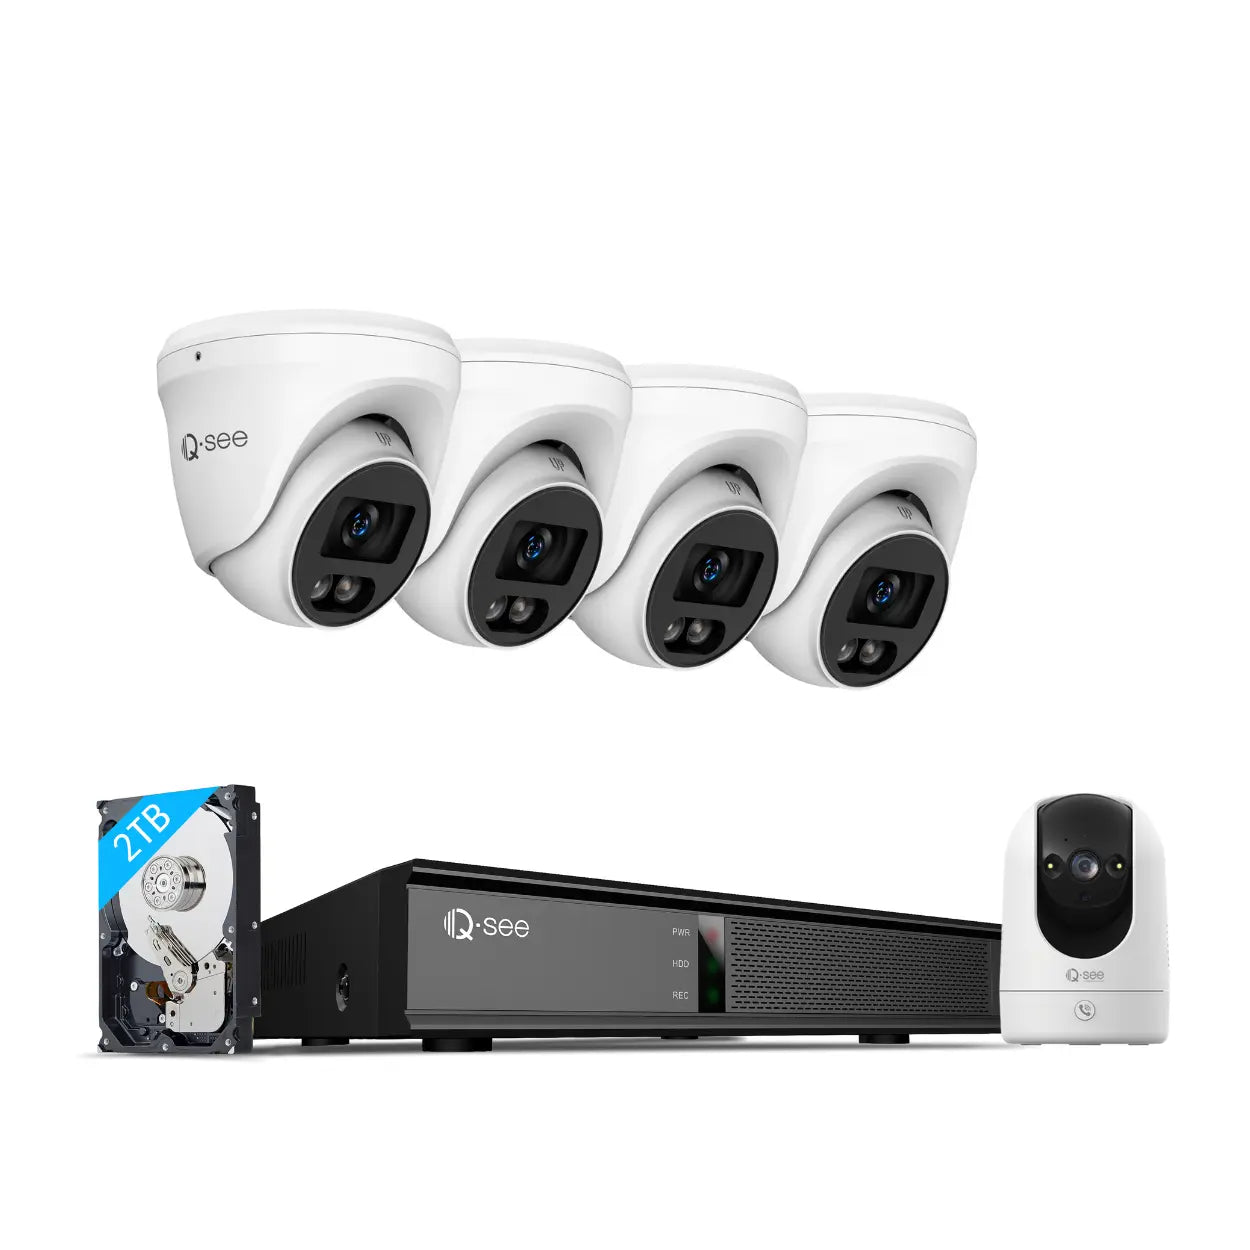 Qsee 4K 2TB PoE NVR Dome Camera Security System with Color Night Vision QP08048AC